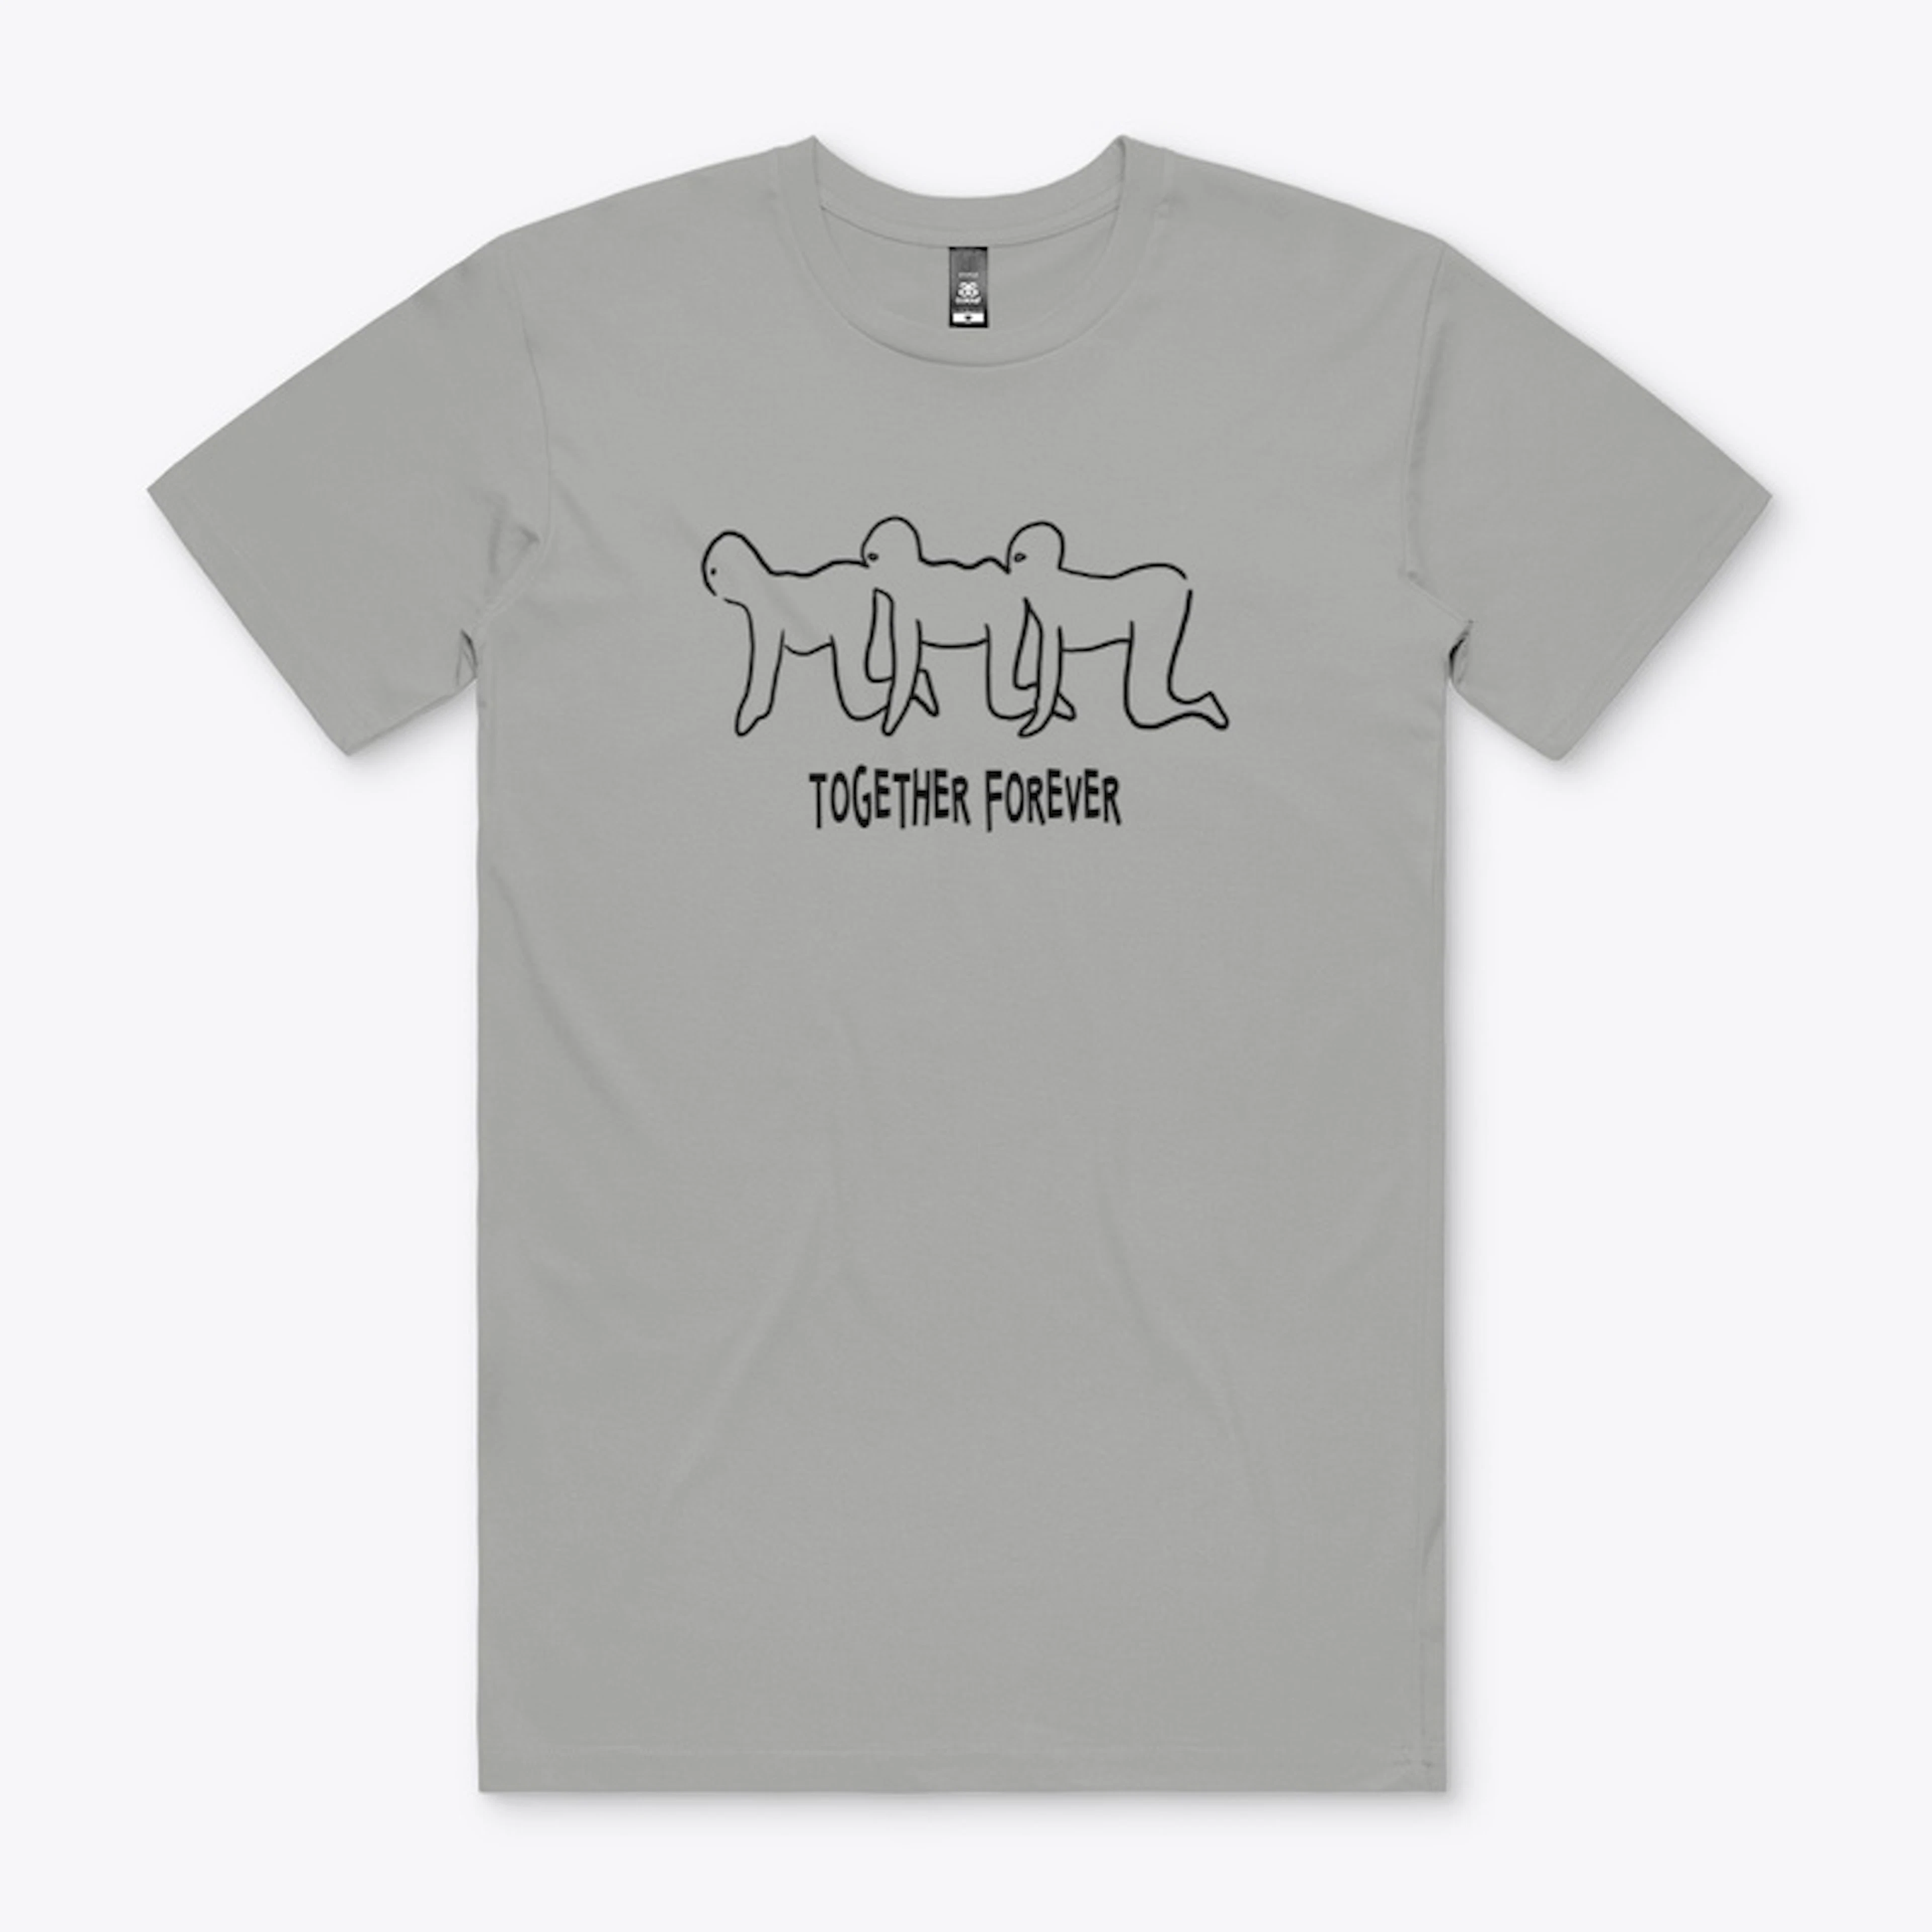 Together forever friendship tee